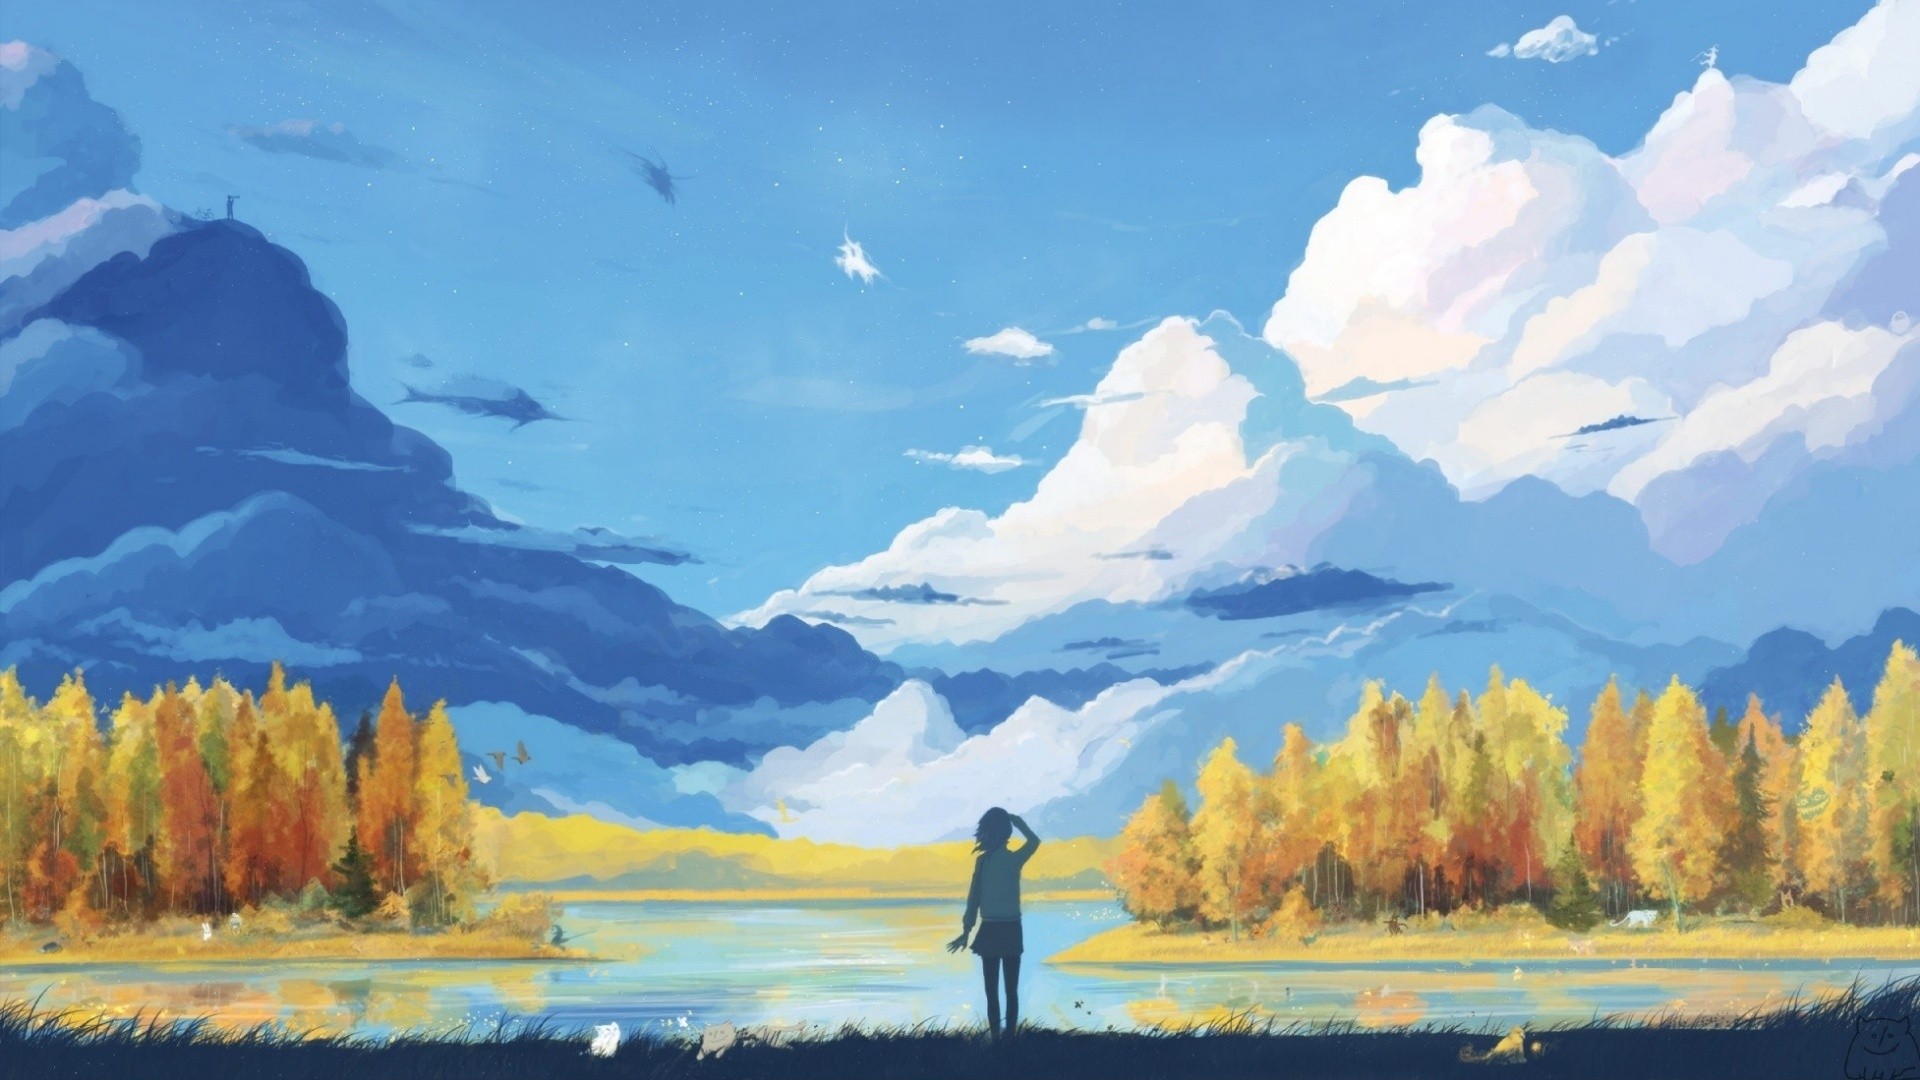 Anime Scenery wallpaper ·① Download free awesome ...